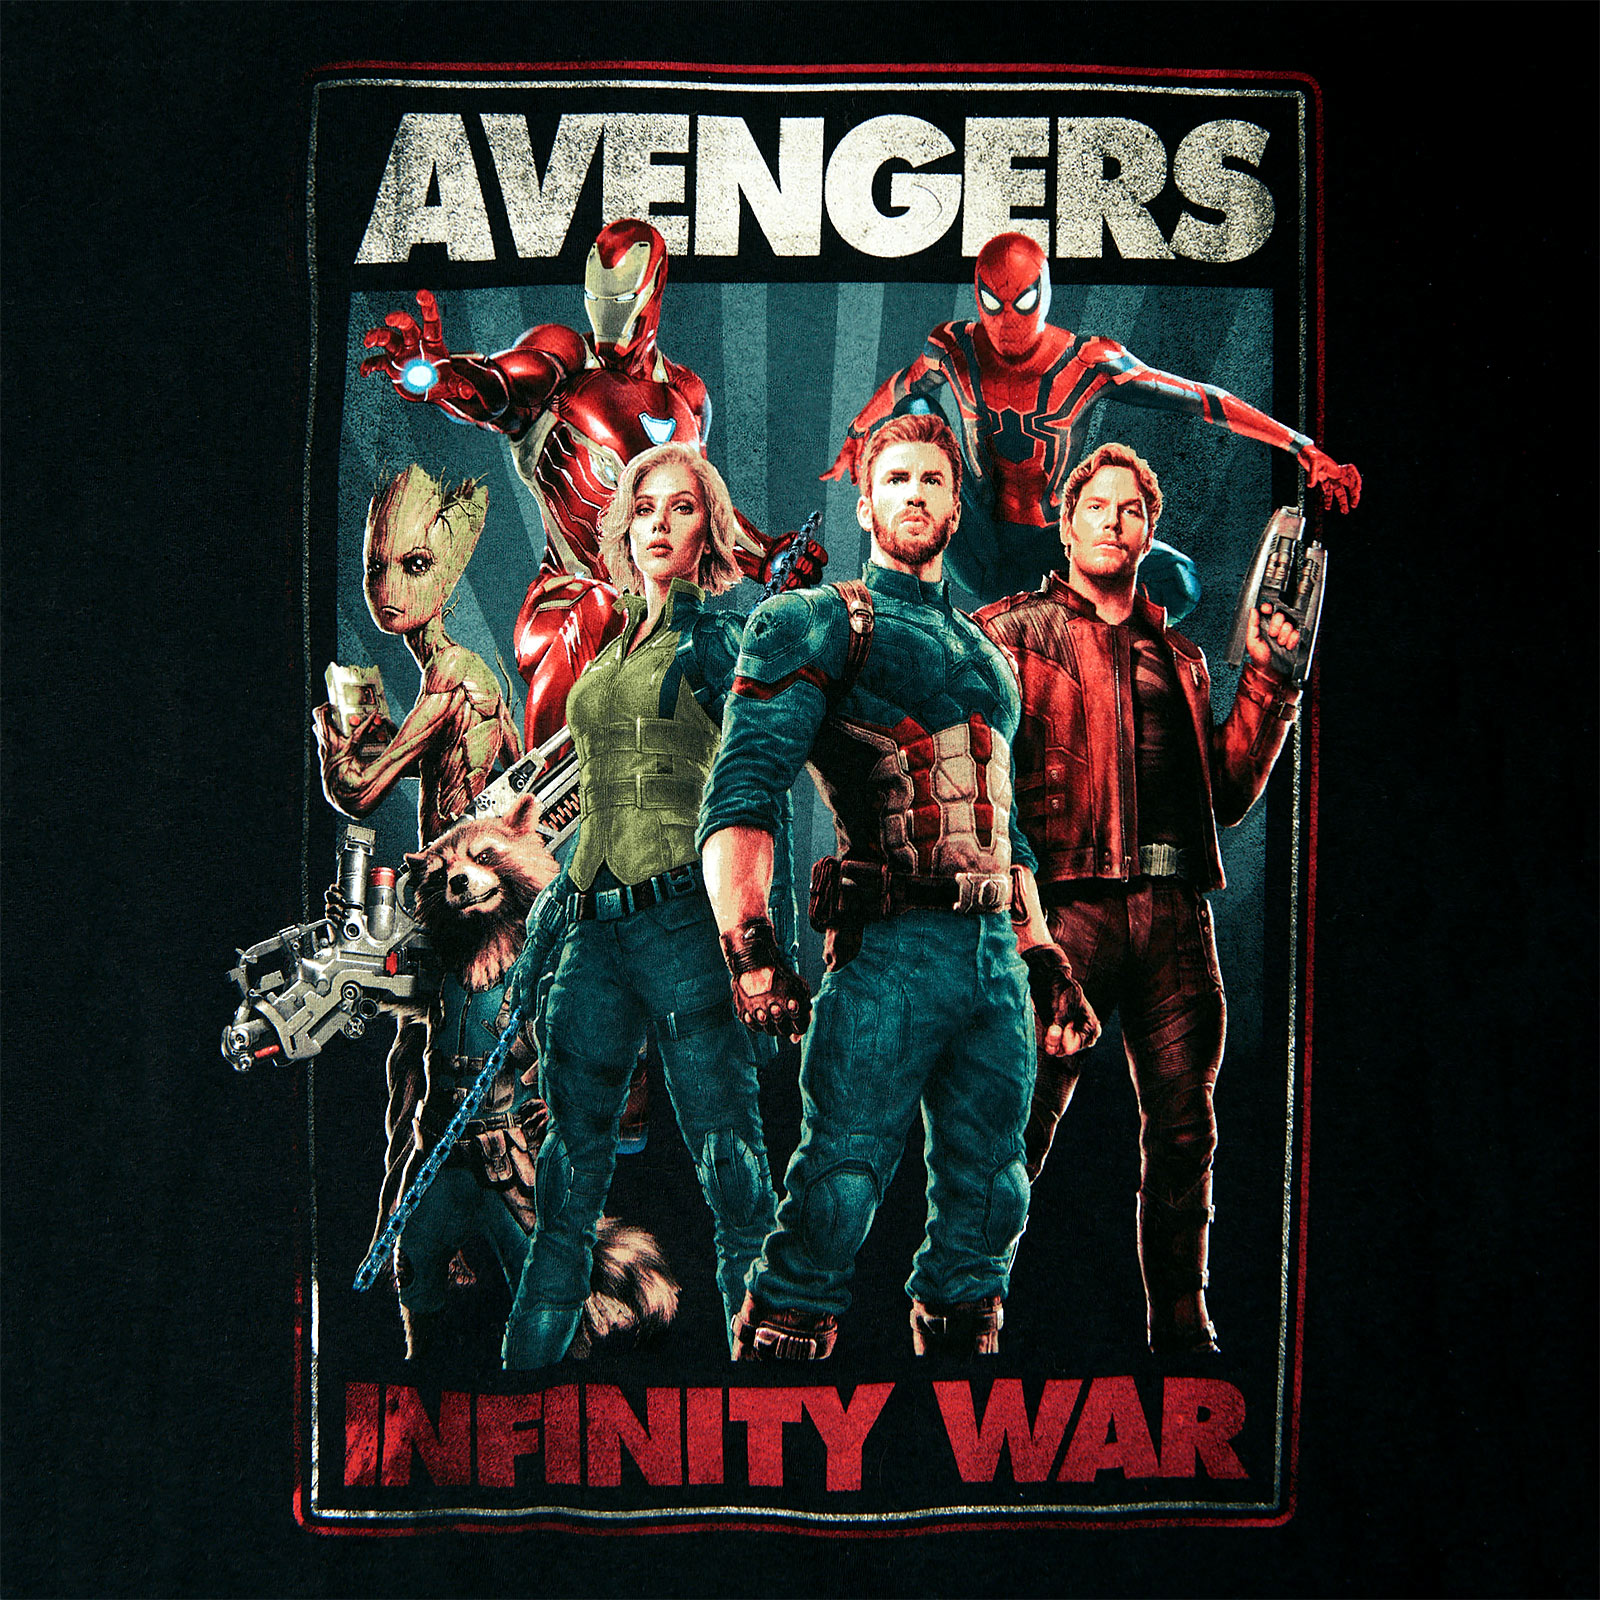 Avengers - Infinity Heroes Collage T-Shirt black